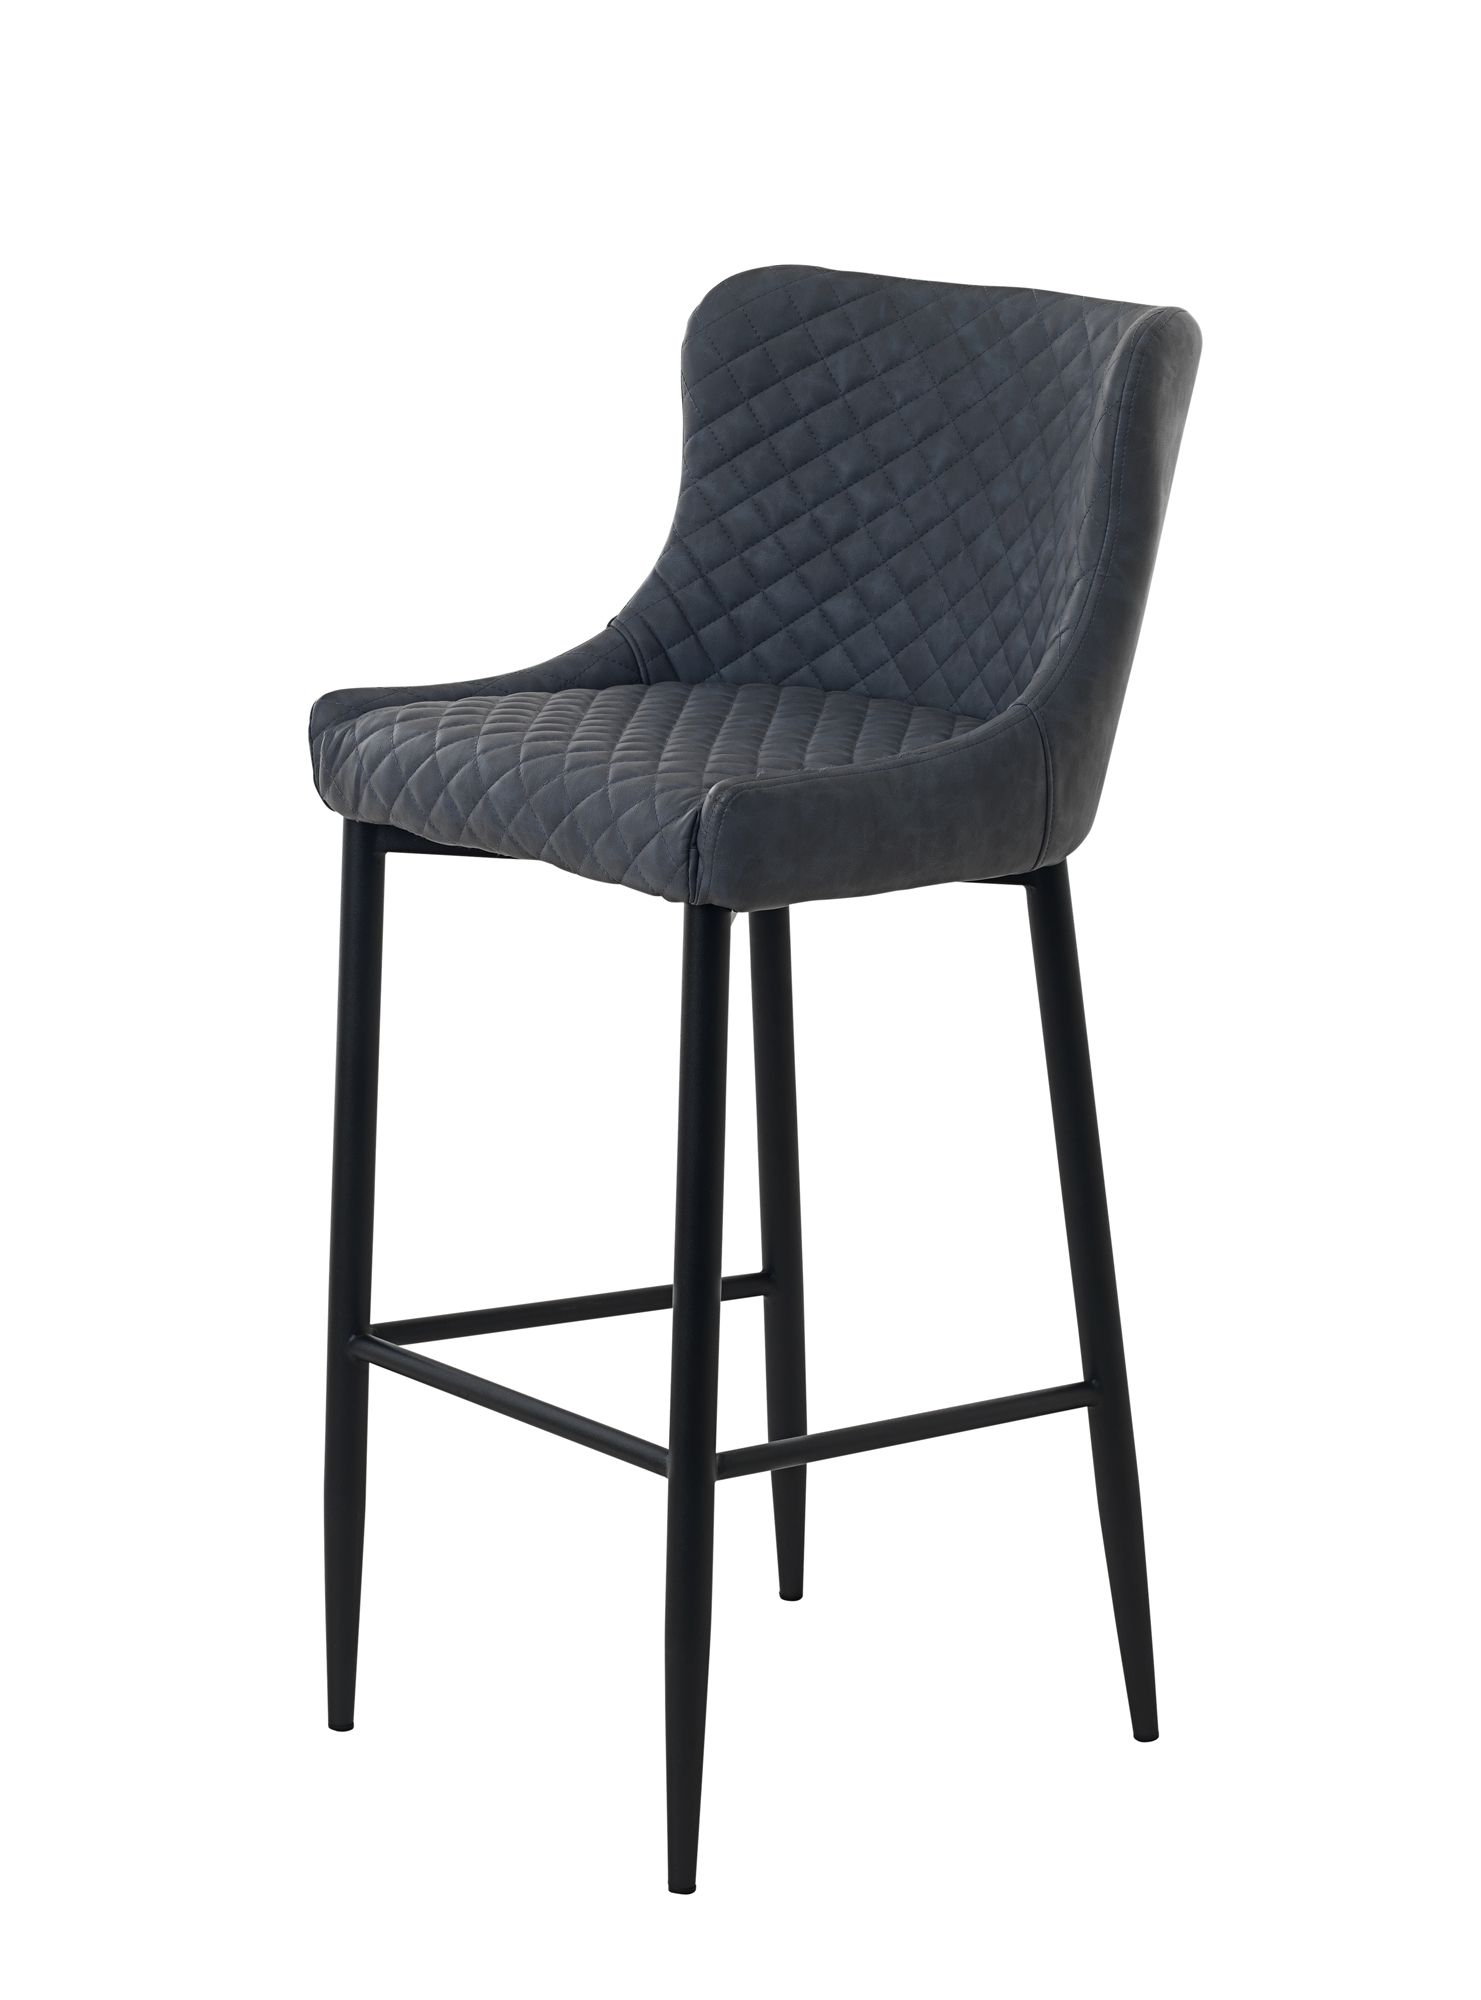 Quebec High Bar Stool Faux Leather Grey, Leather Effect Bar Stools